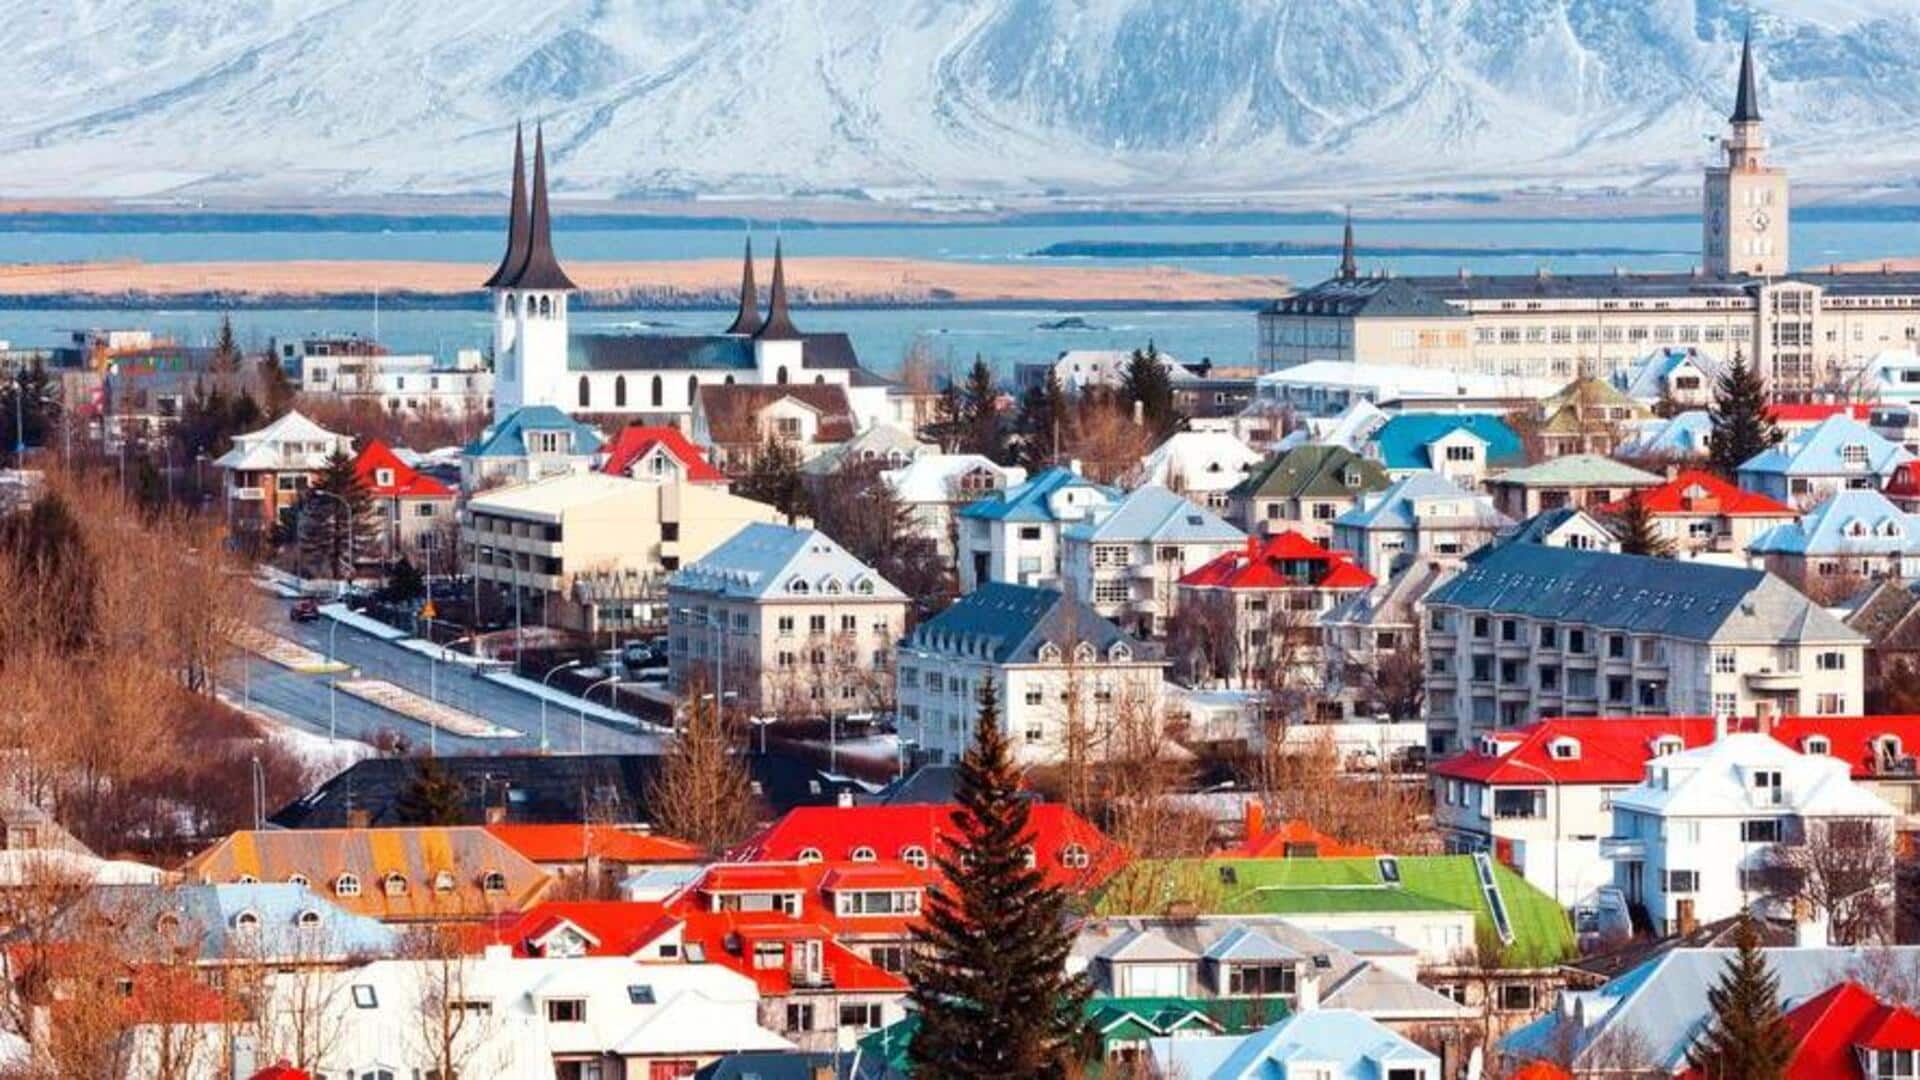 Reykjavik is a paradise for nature lovers and fun seekers